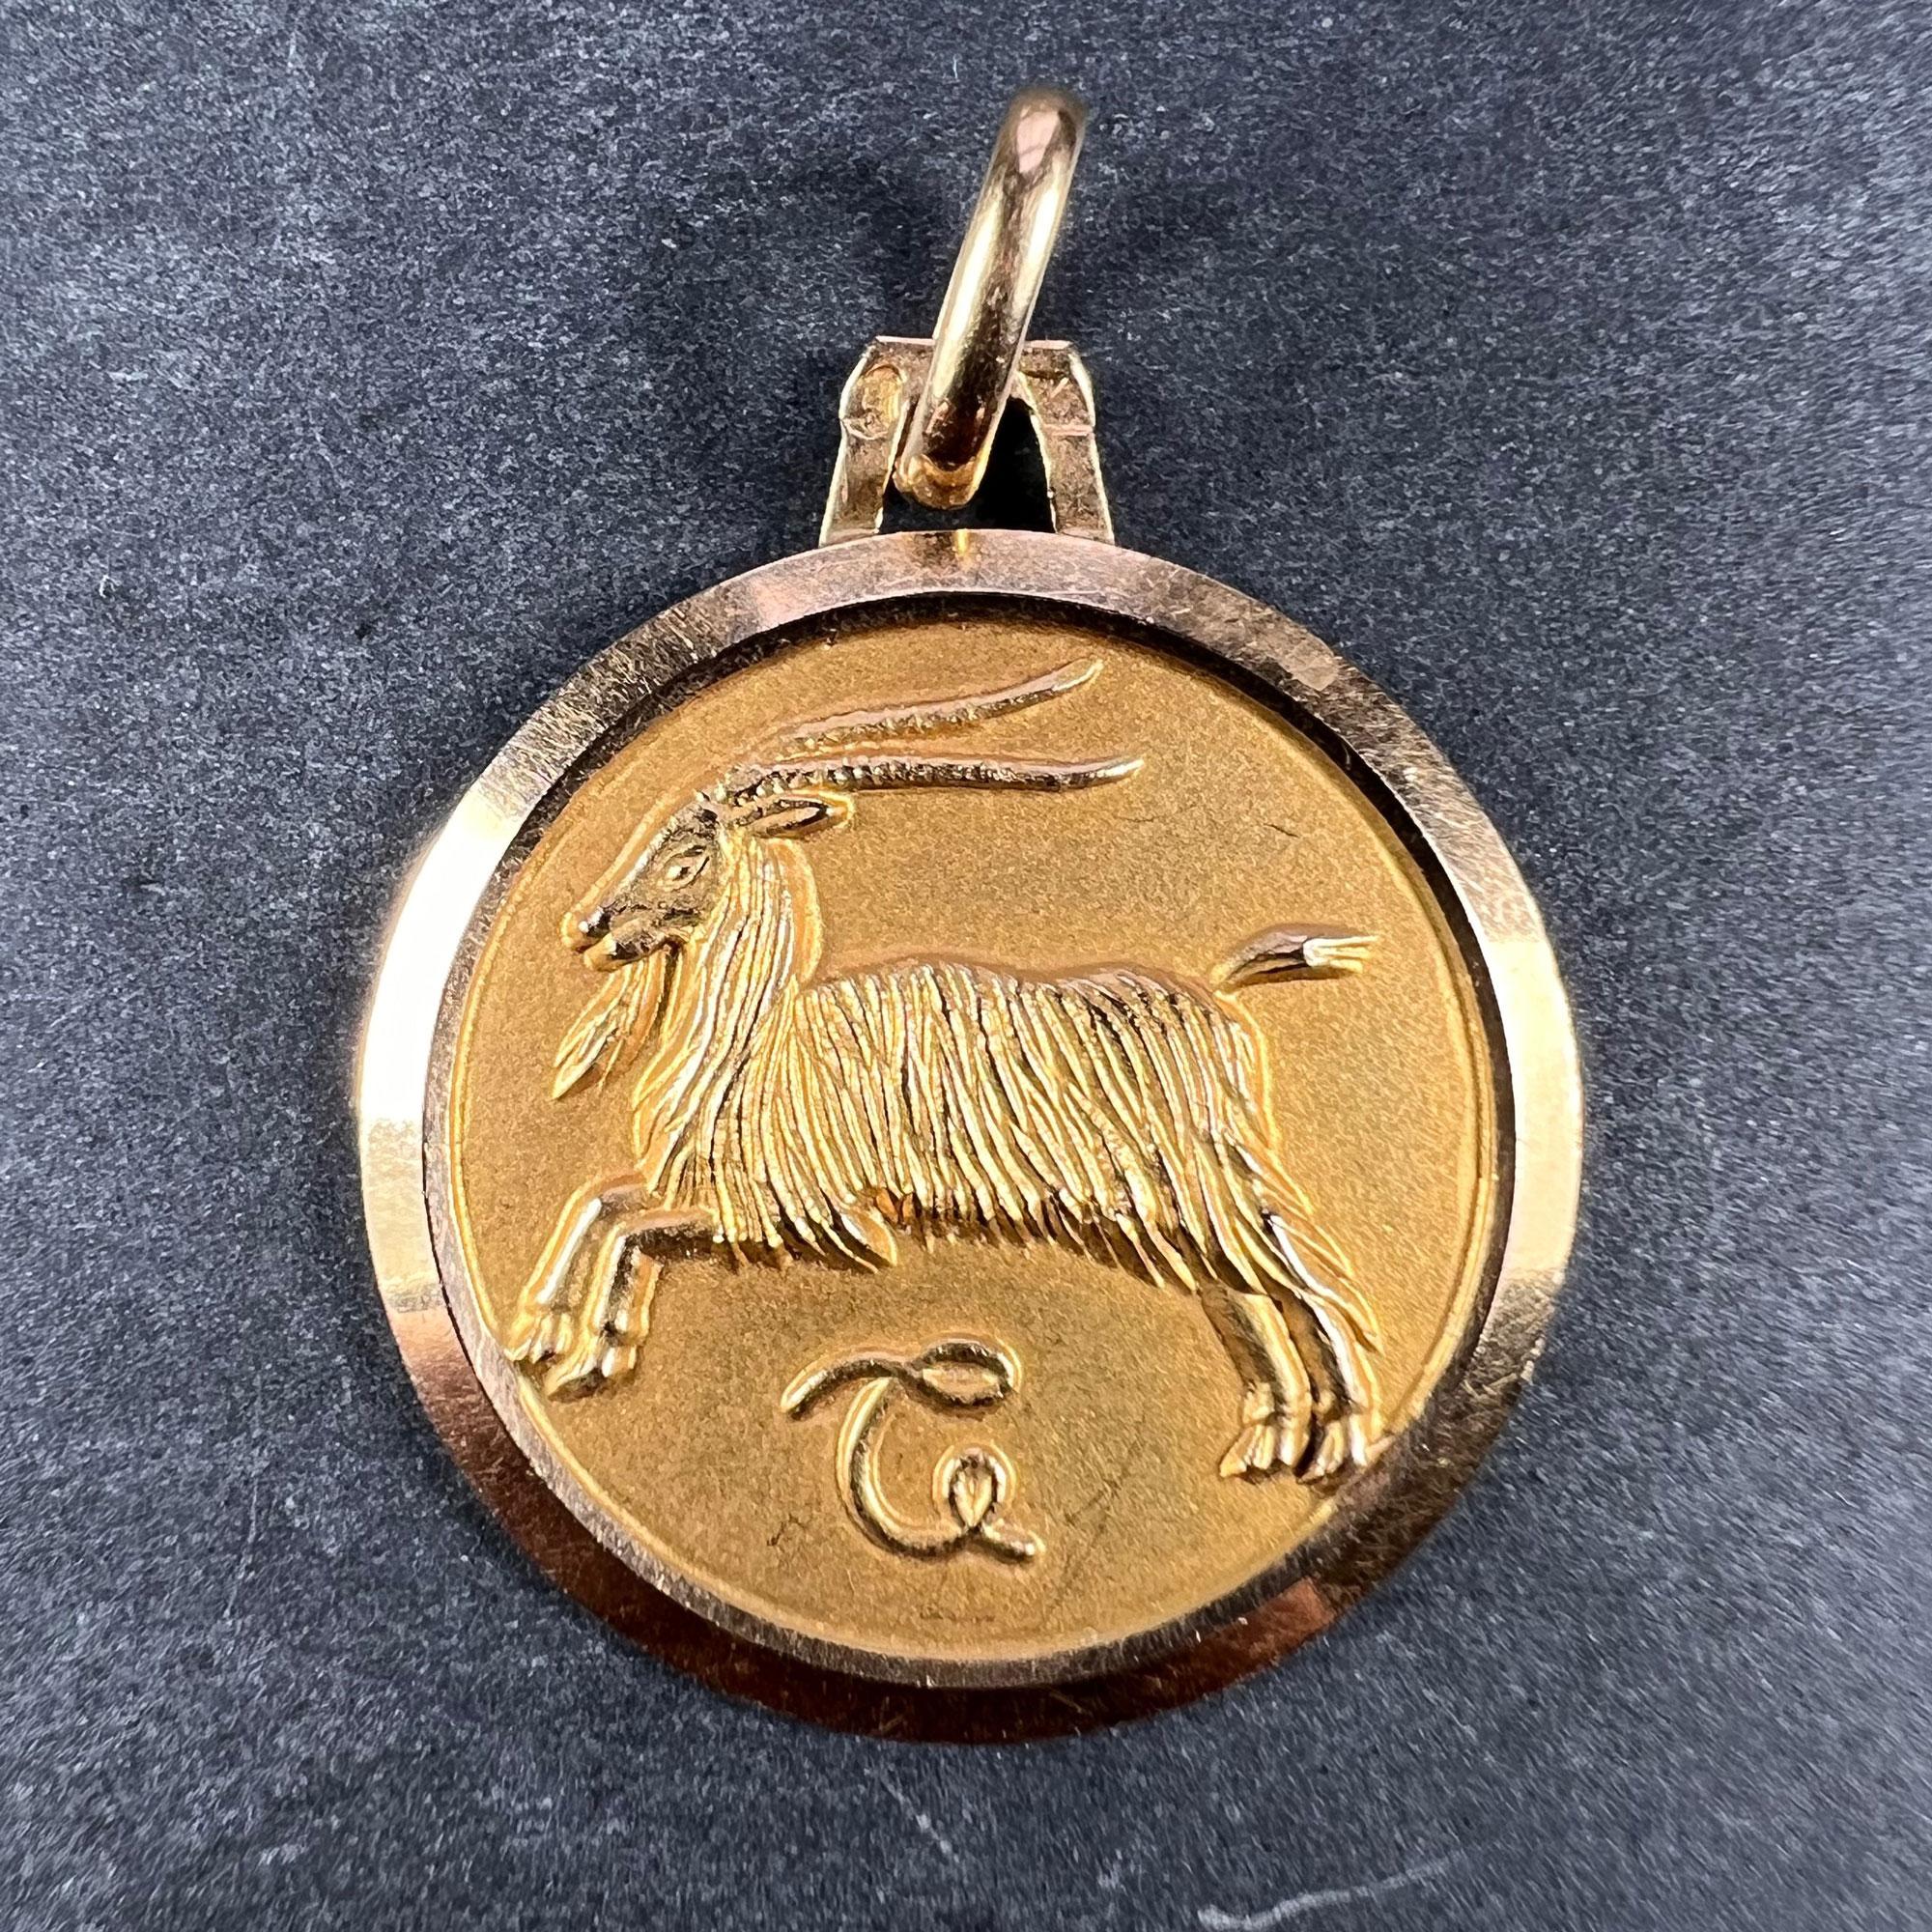 A French 18 karat (18K) yellow gold charm pendant designed as the Zodiac sign of Capricorn in yellow gold within a circular frame. The zodiac symbol for the sign is an artistic version of the lesser known Capricorn symbol. Stamped with the eagle’s